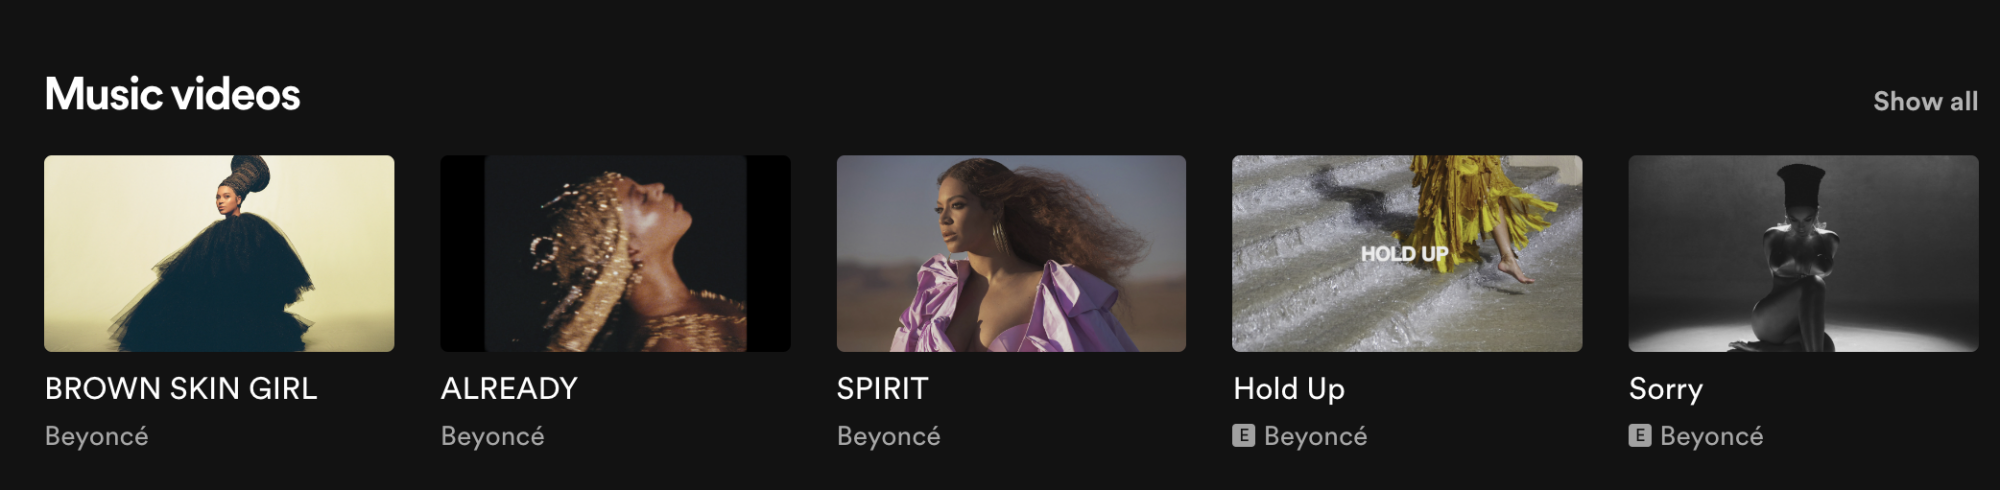 A screenshot of Spotify showing a carousel of Beyonce music videos.